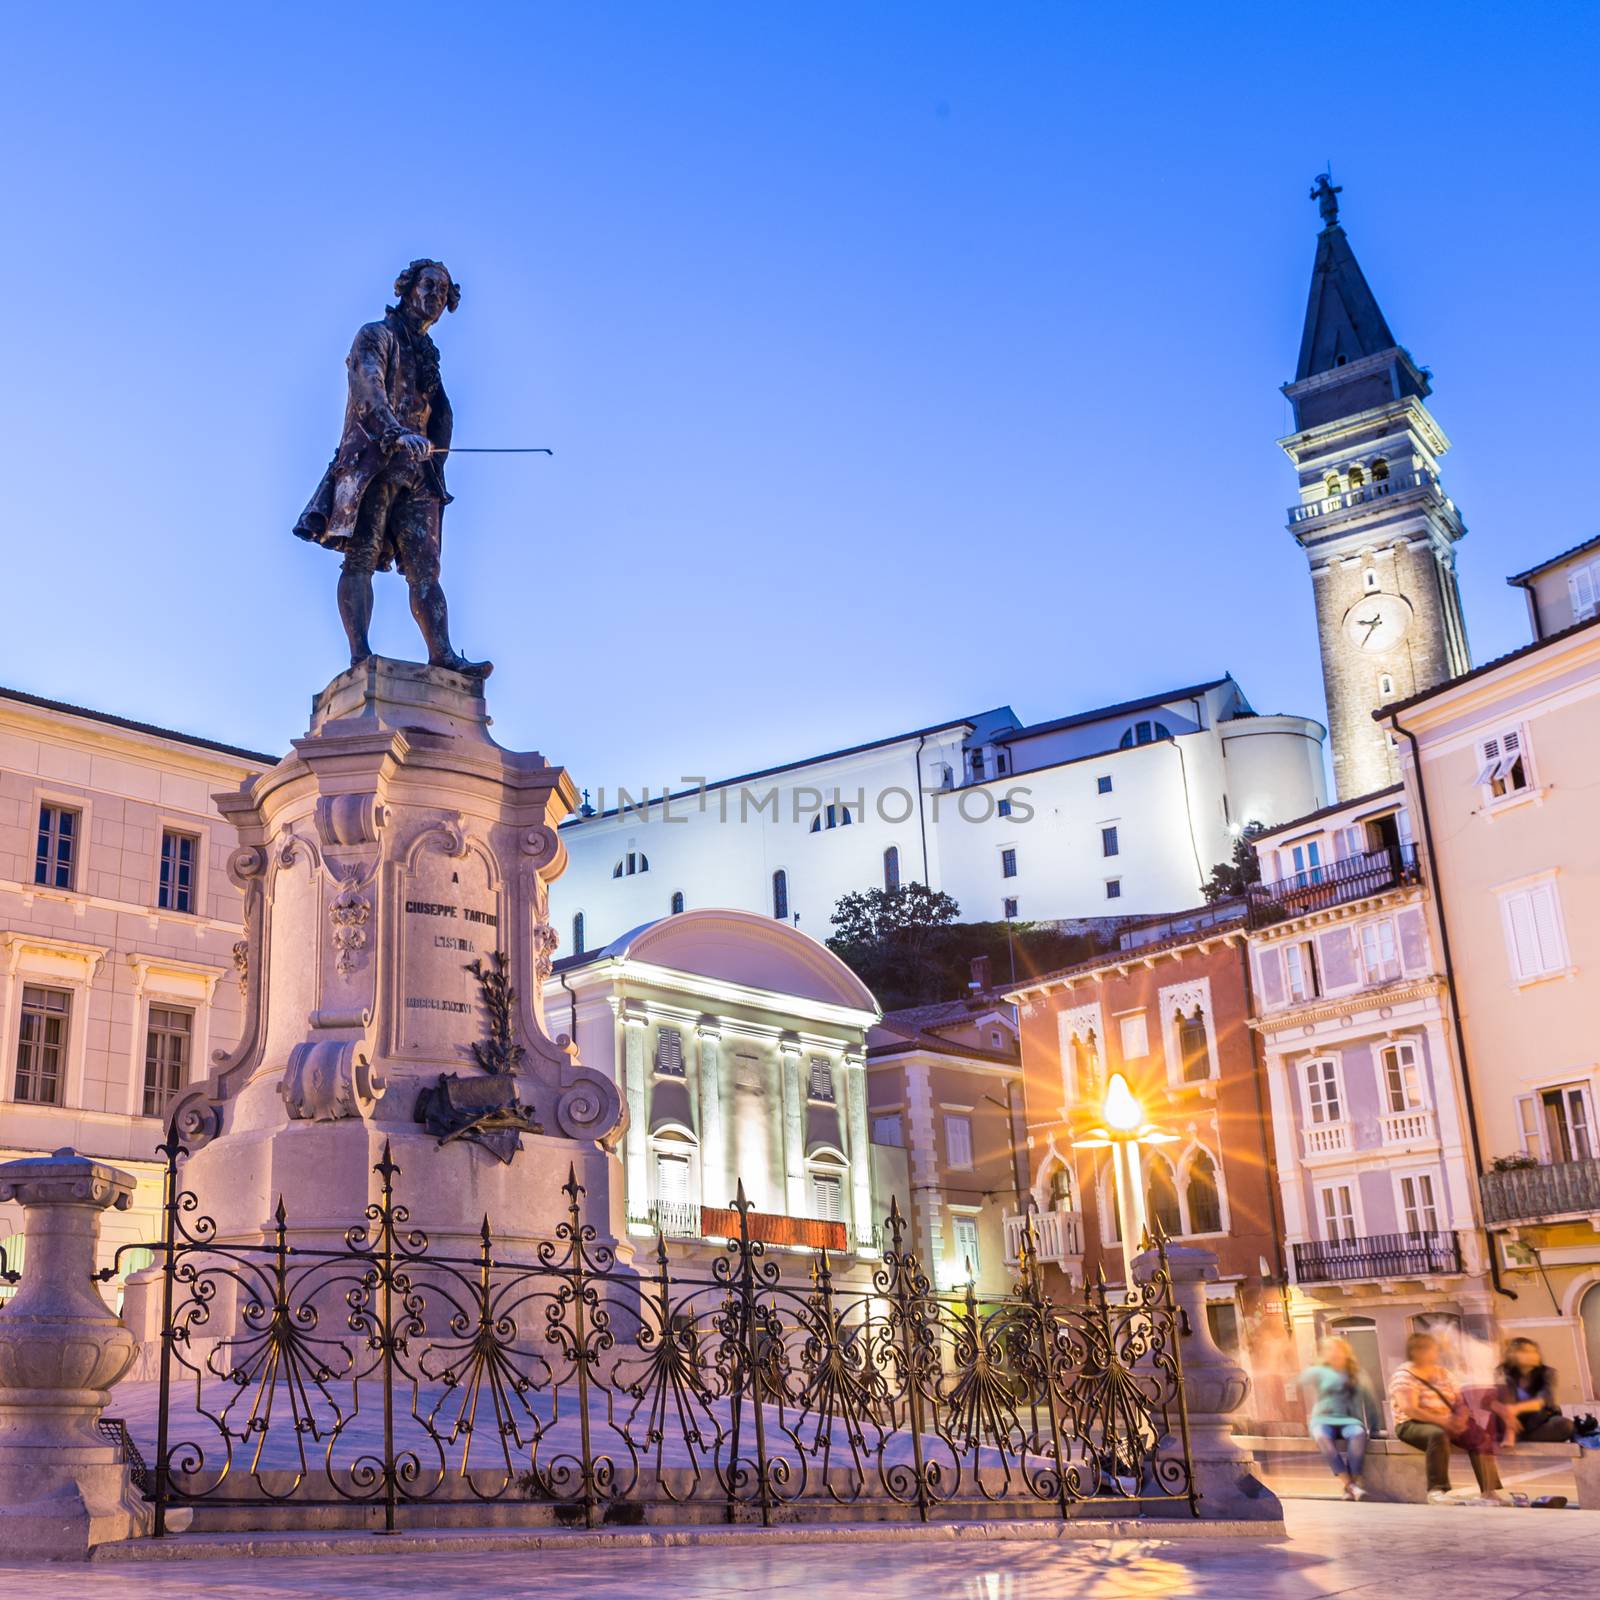 The Tartini Square (Slovene: Tartinijev trg, Italian: Piazza Tartini) is the largest and main square in the town of Piran, Slovenia. It was named after violinist and composer Giuseppe Tartini.